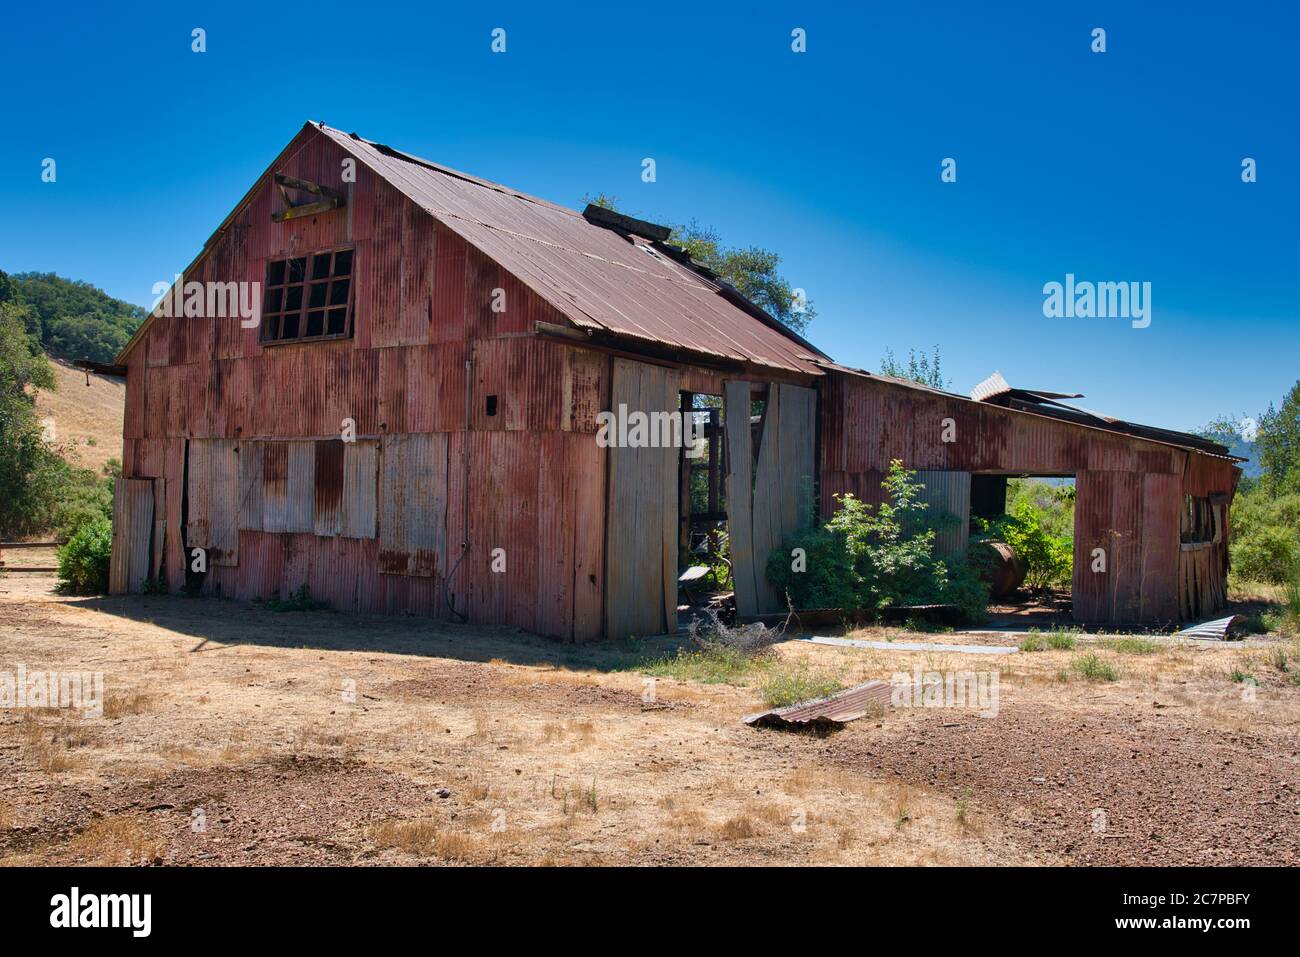 Corrugated sheet metal barn used in Mercury Mining at Almaden Quicksilver County Park Stock Photo